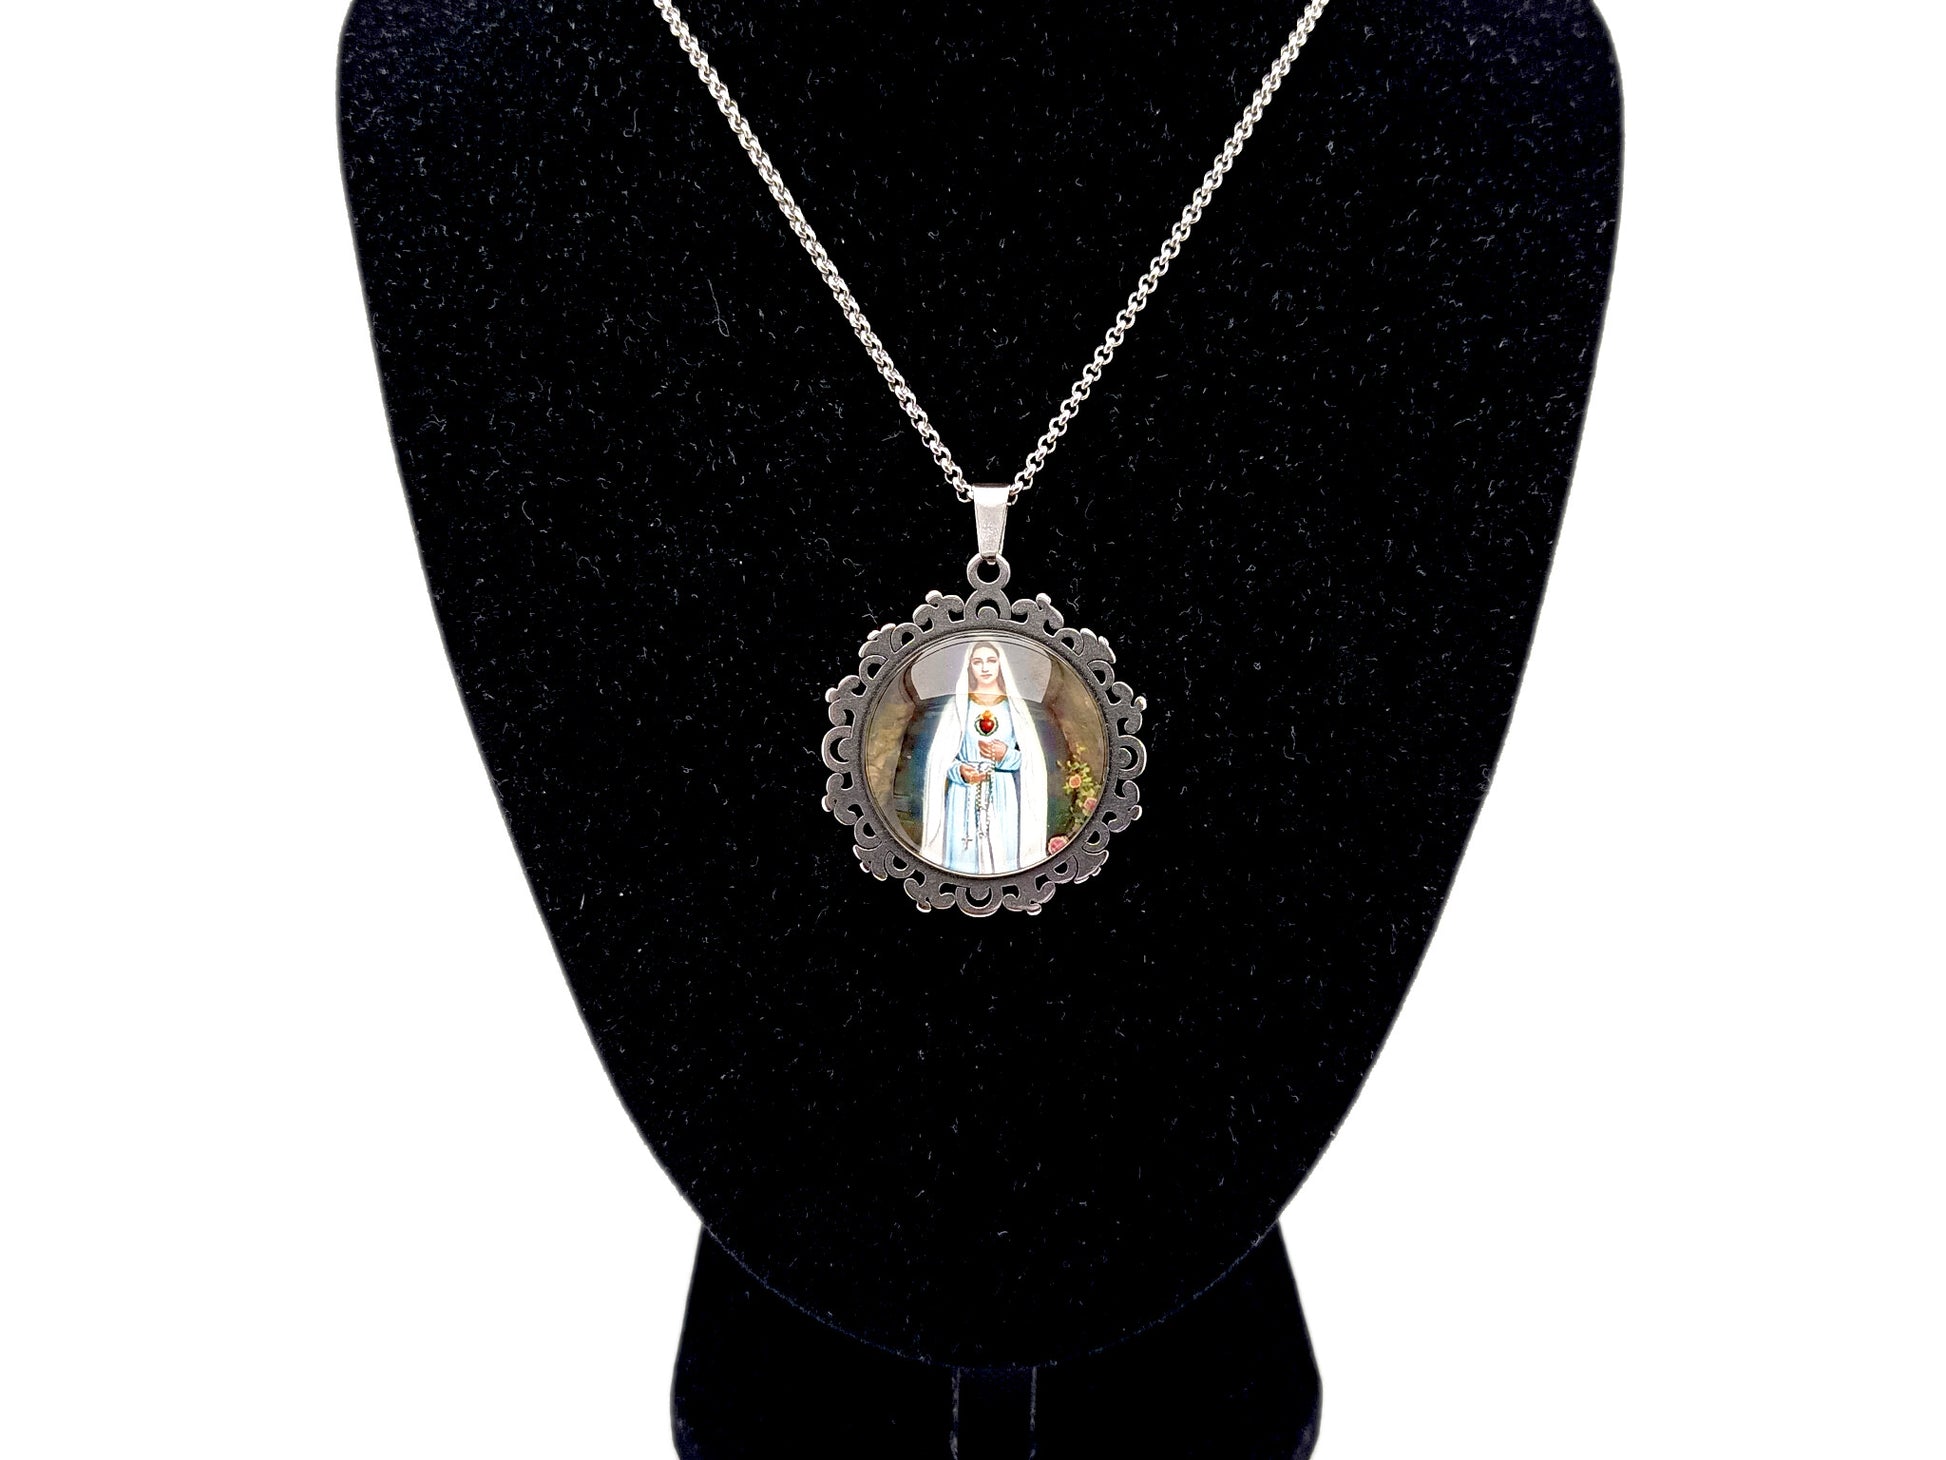 Immaculate Heart of Mary unique rosary beads pendant necklace with stainless steel domed picture medal and 20" stainless steel belcher chain.